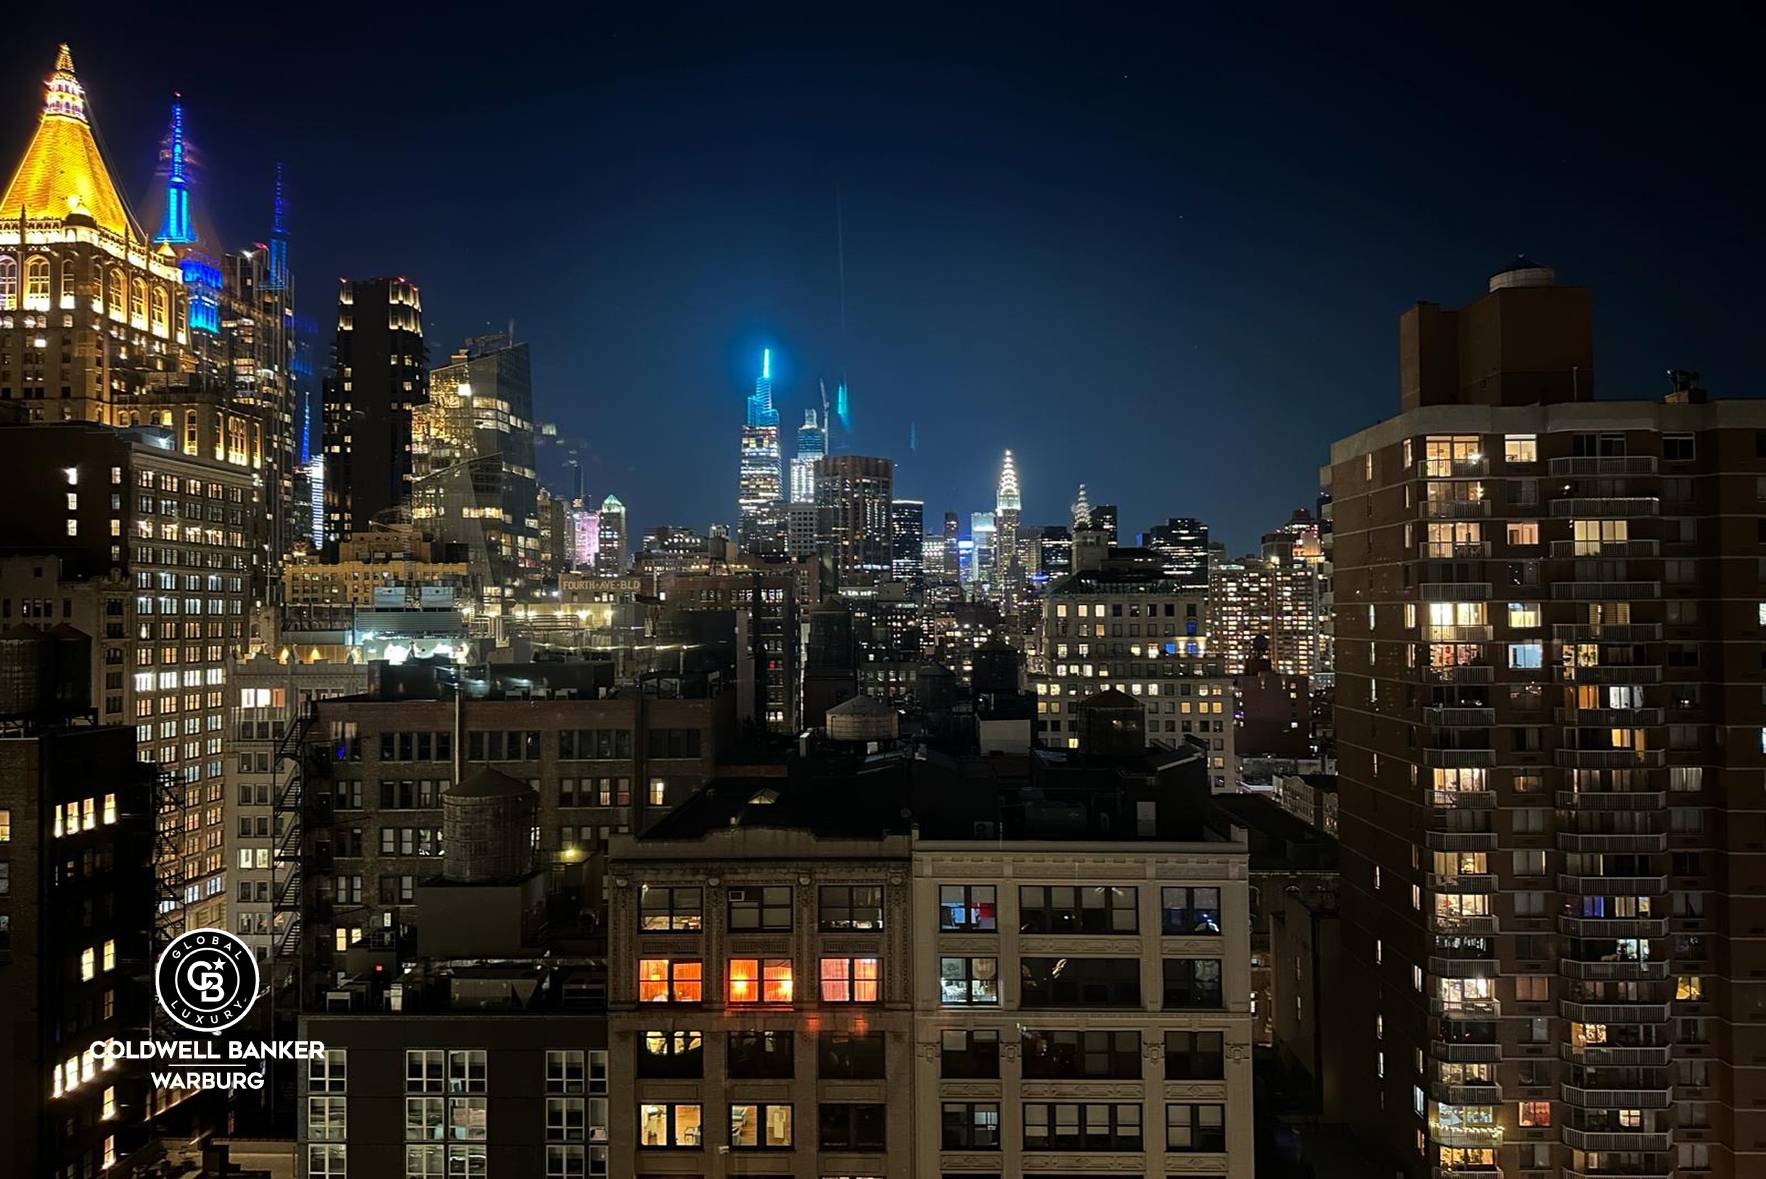 Indulge in the epitome of urban luxury living at 121 East 23rd Street, Penthouse D, a sensational triplex residence boasting outrageous views of the New York City Skyline, three bedrooms, ...